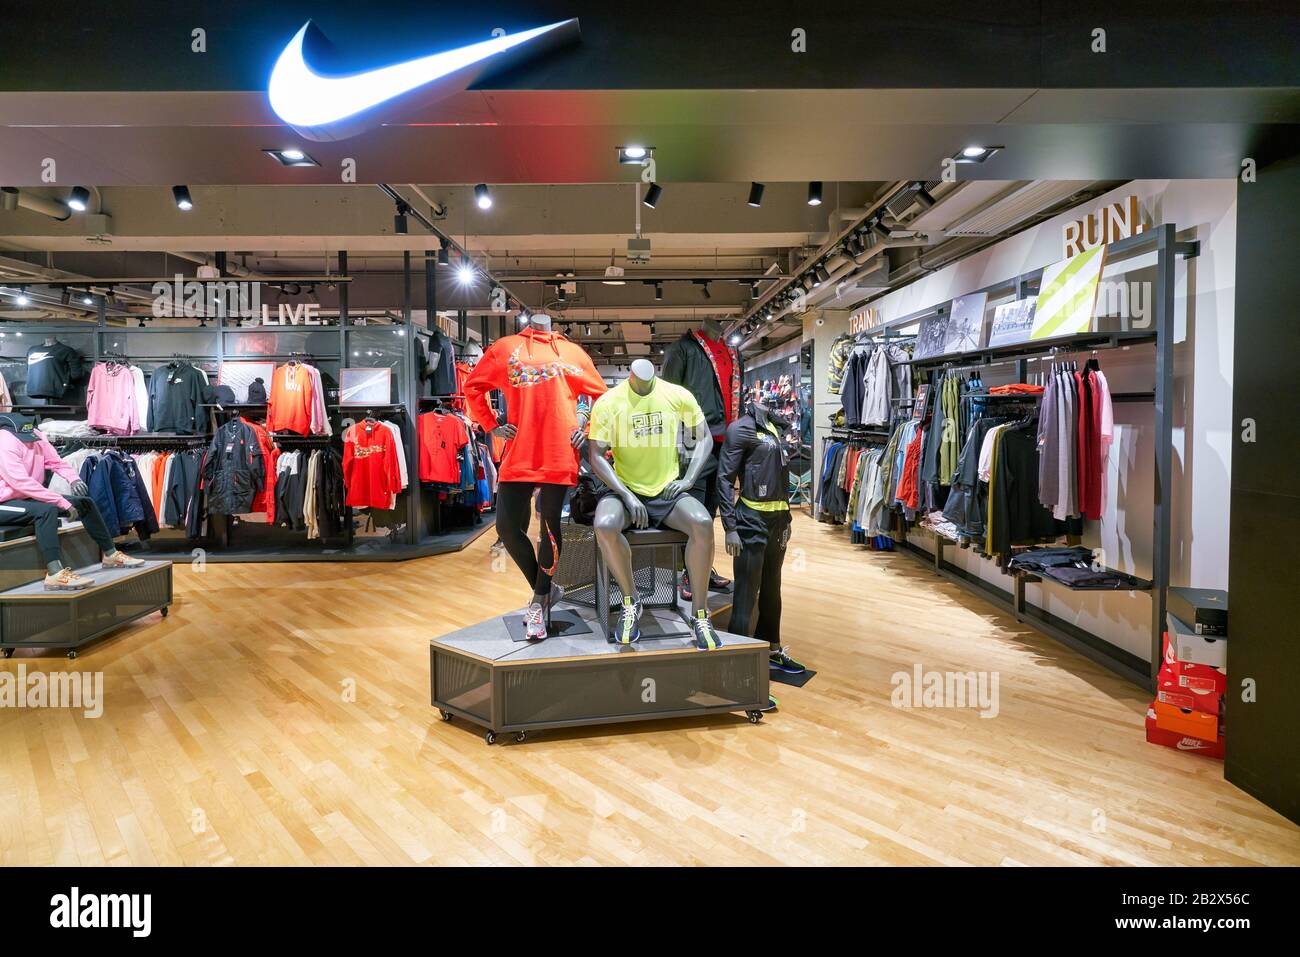 Page 3 - Nike Sign High Resolution Stock Photography and Images - Alamy